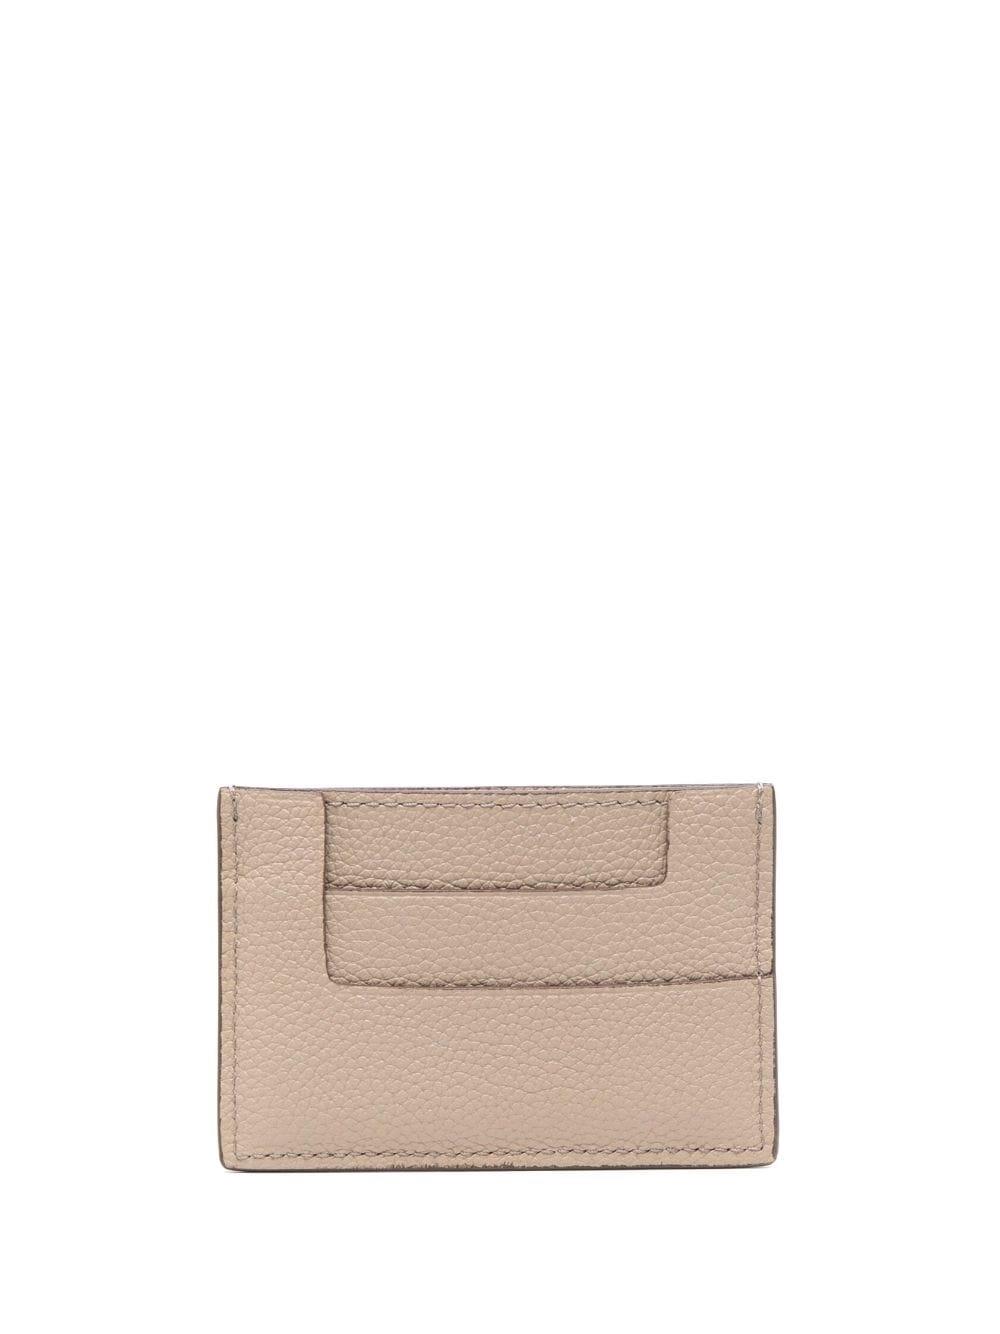 TOM FORD TF-plaque leather cardholder - Neutrals